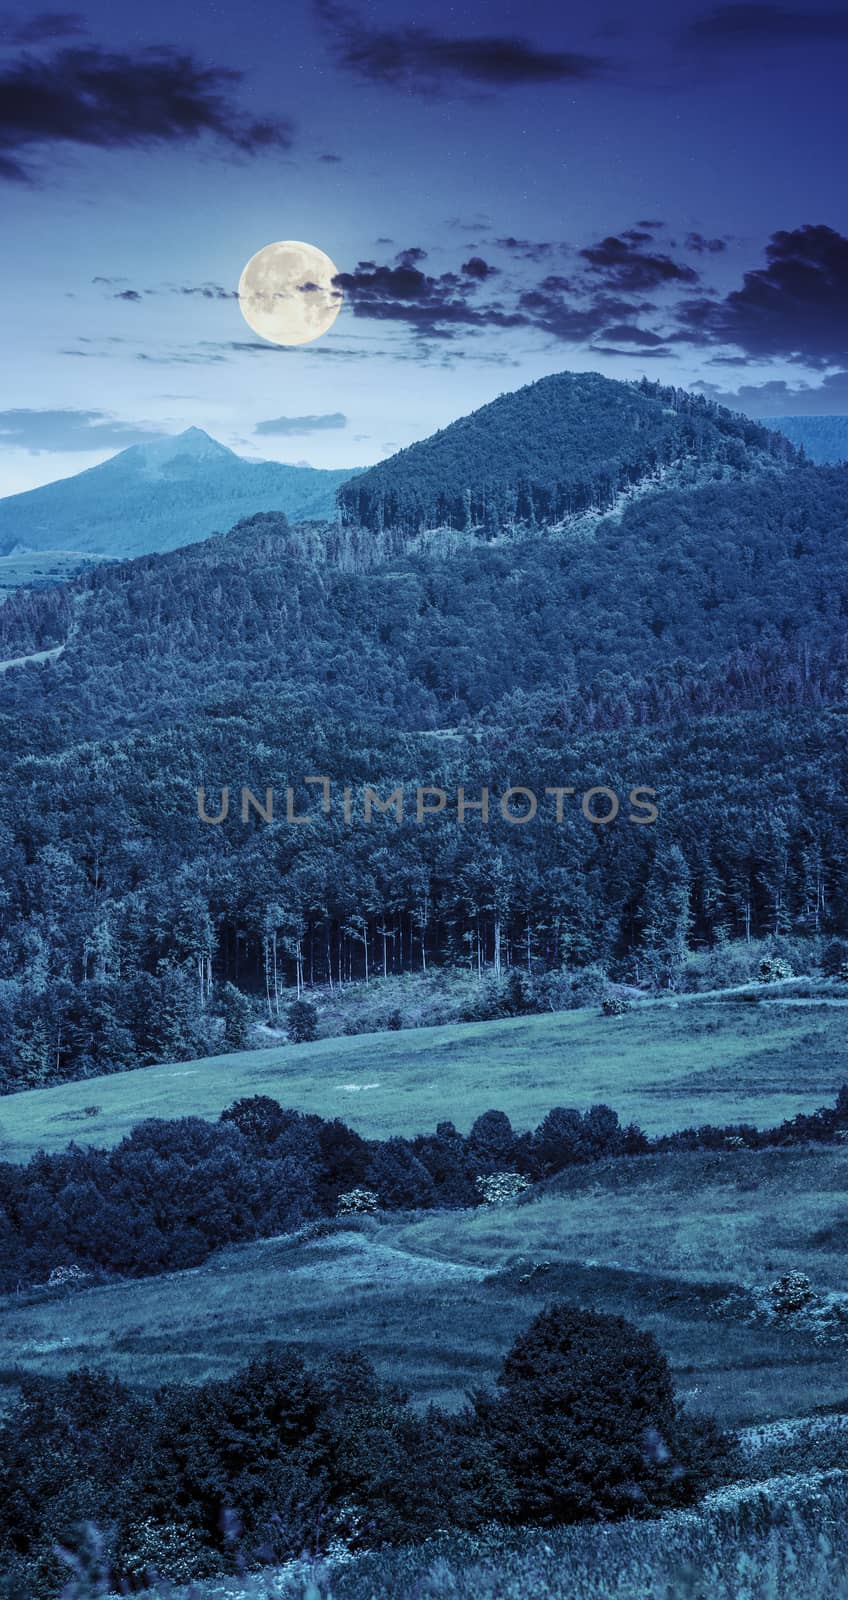 green meadow with trees in the mountainous area at night in full moon ligh